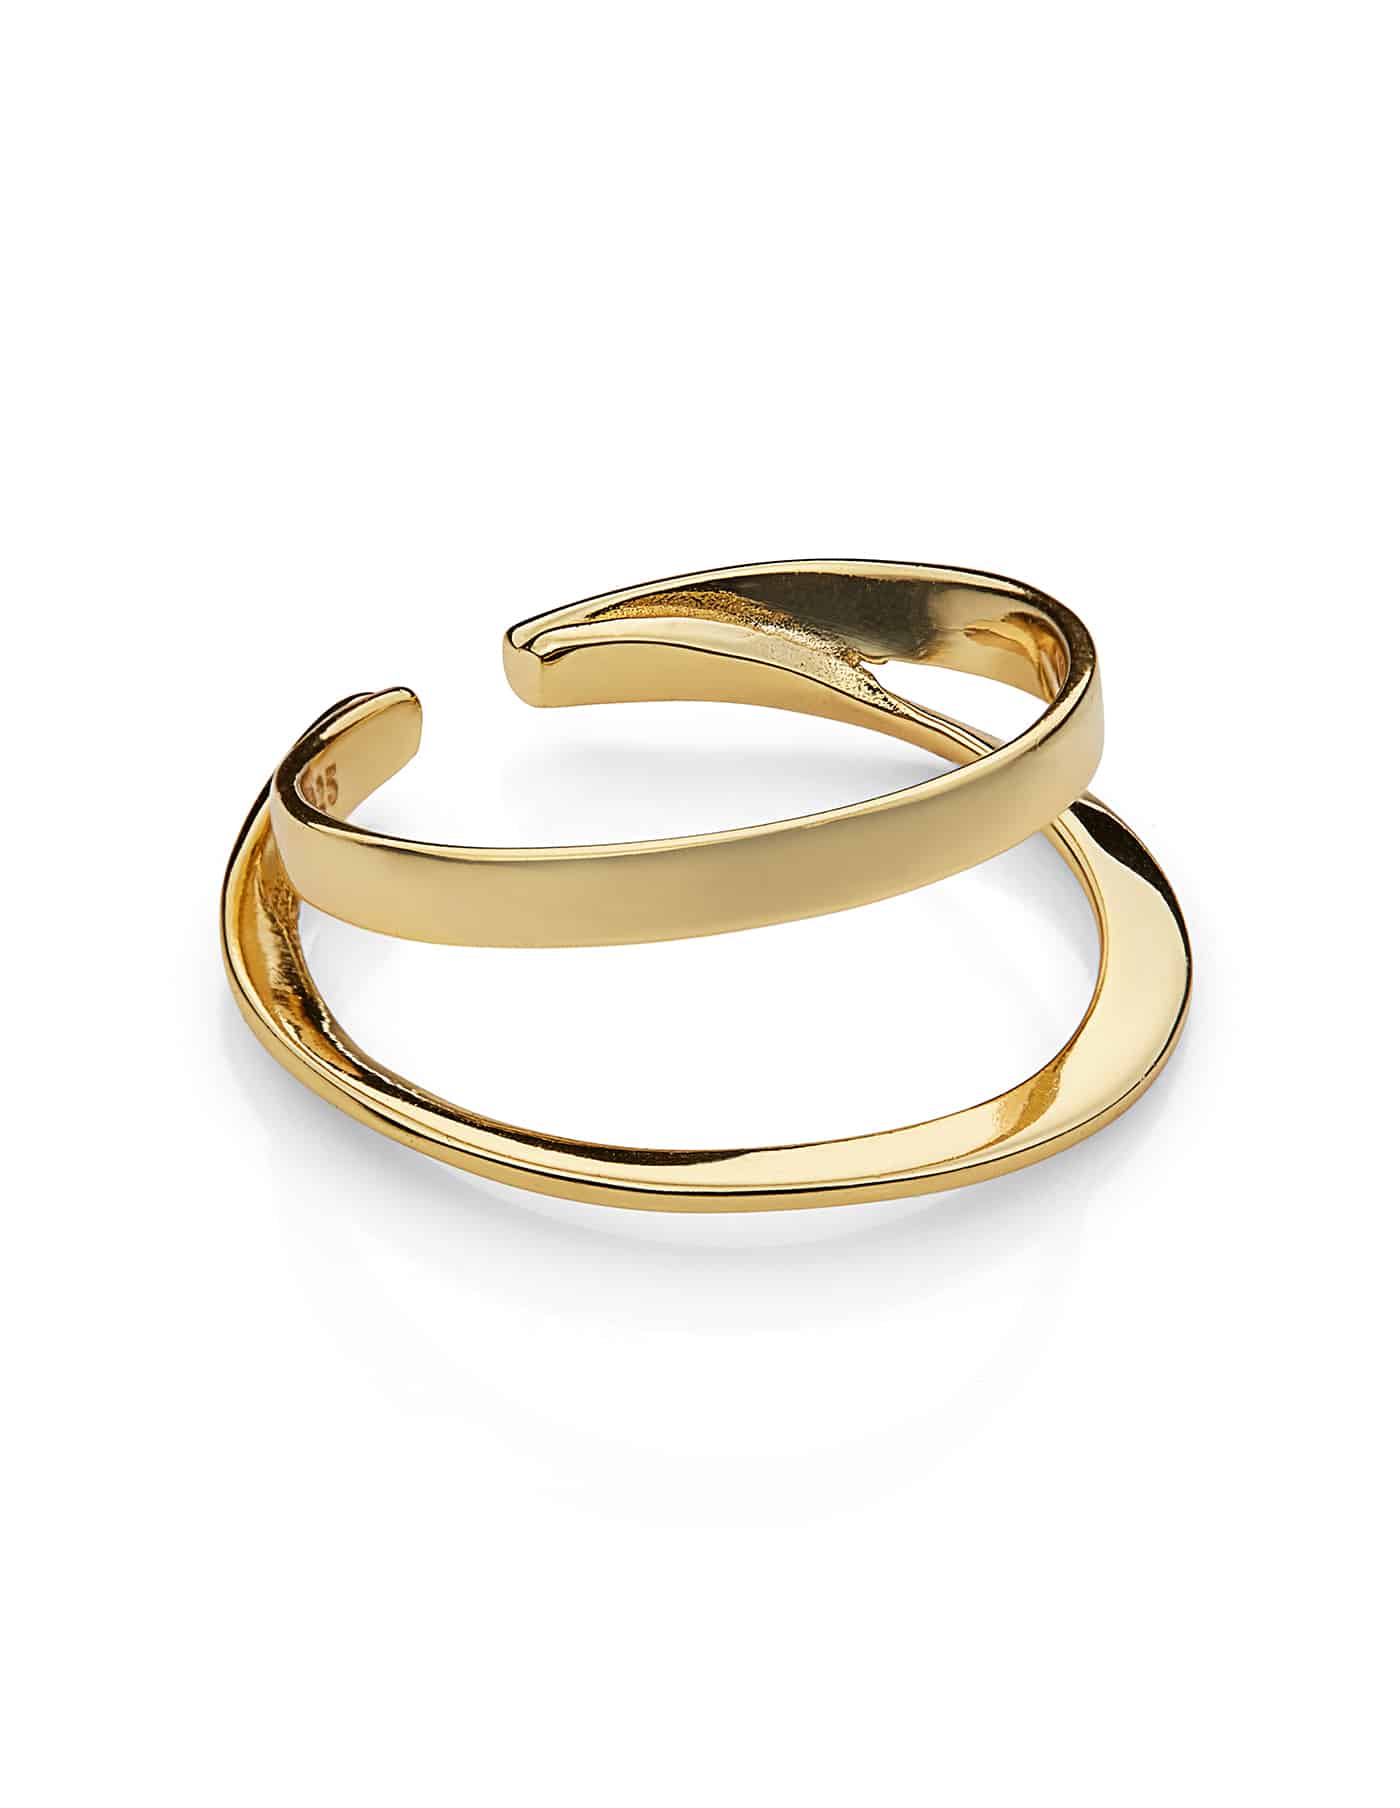 Gold Adjustable Double Layer Ring - Nordicmuse - Golden Hues